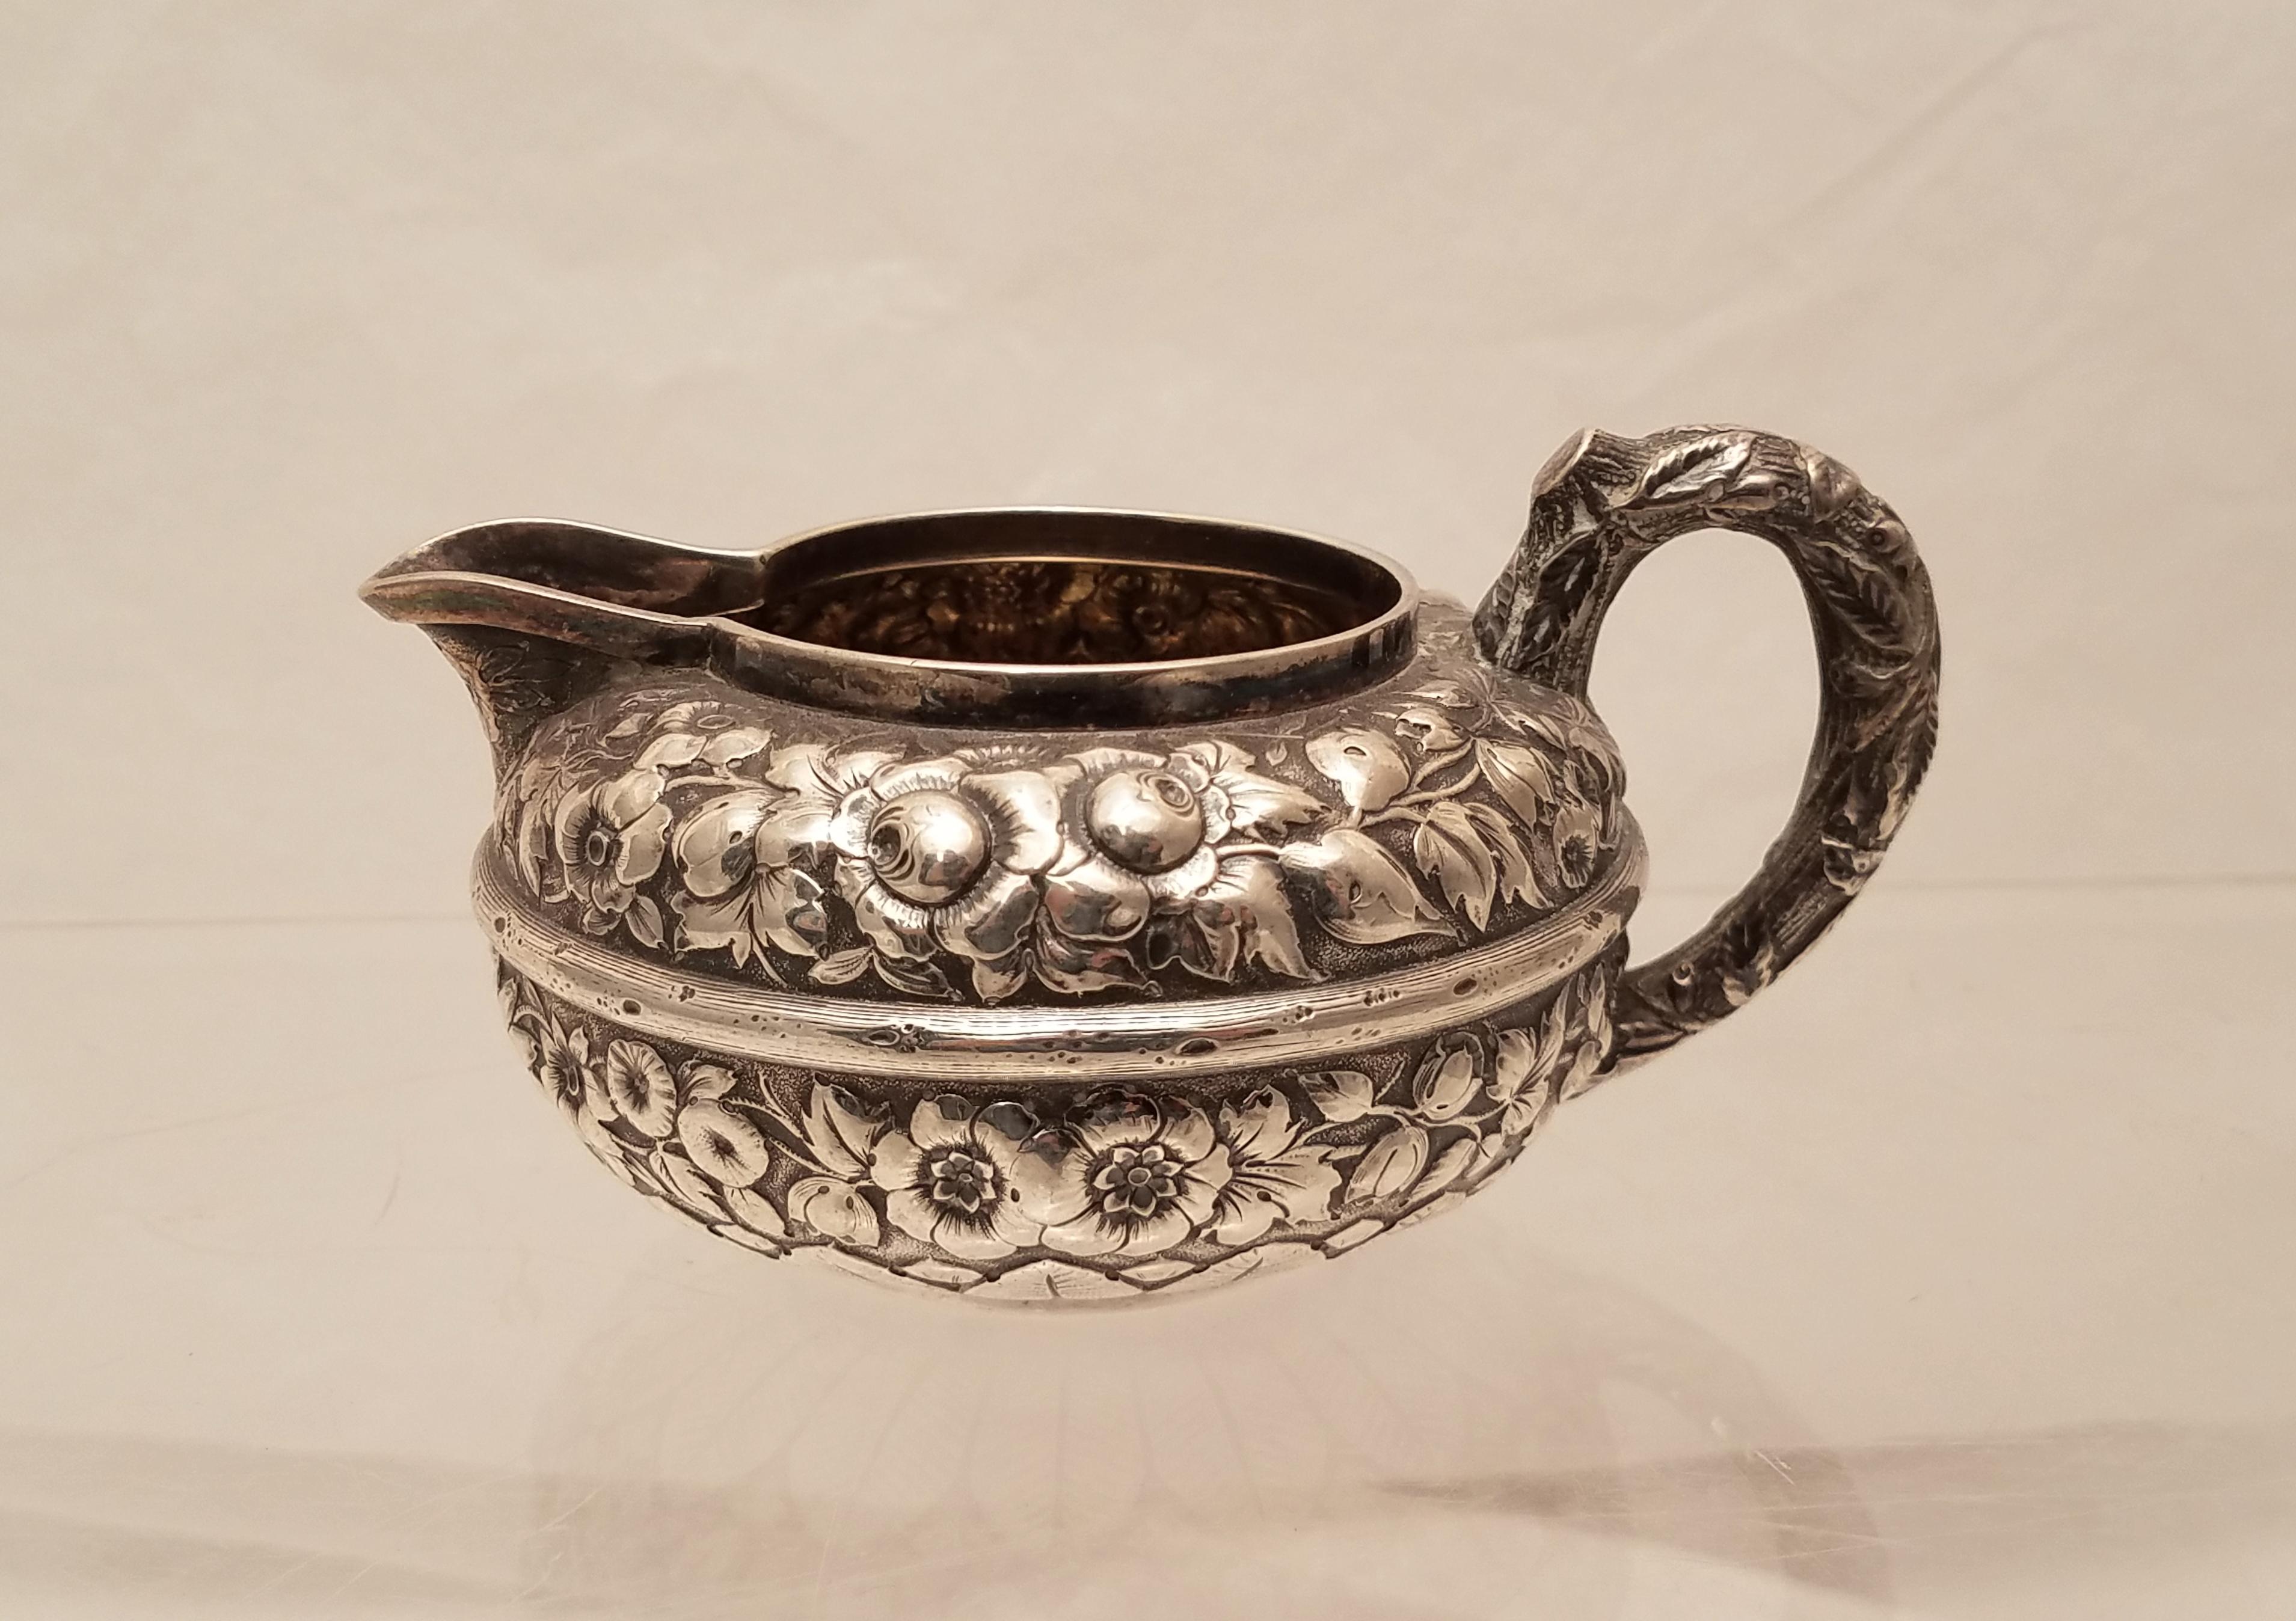 American Gorham Sterling Silver Creamer and Sugar Set in Repousse Design from 1880